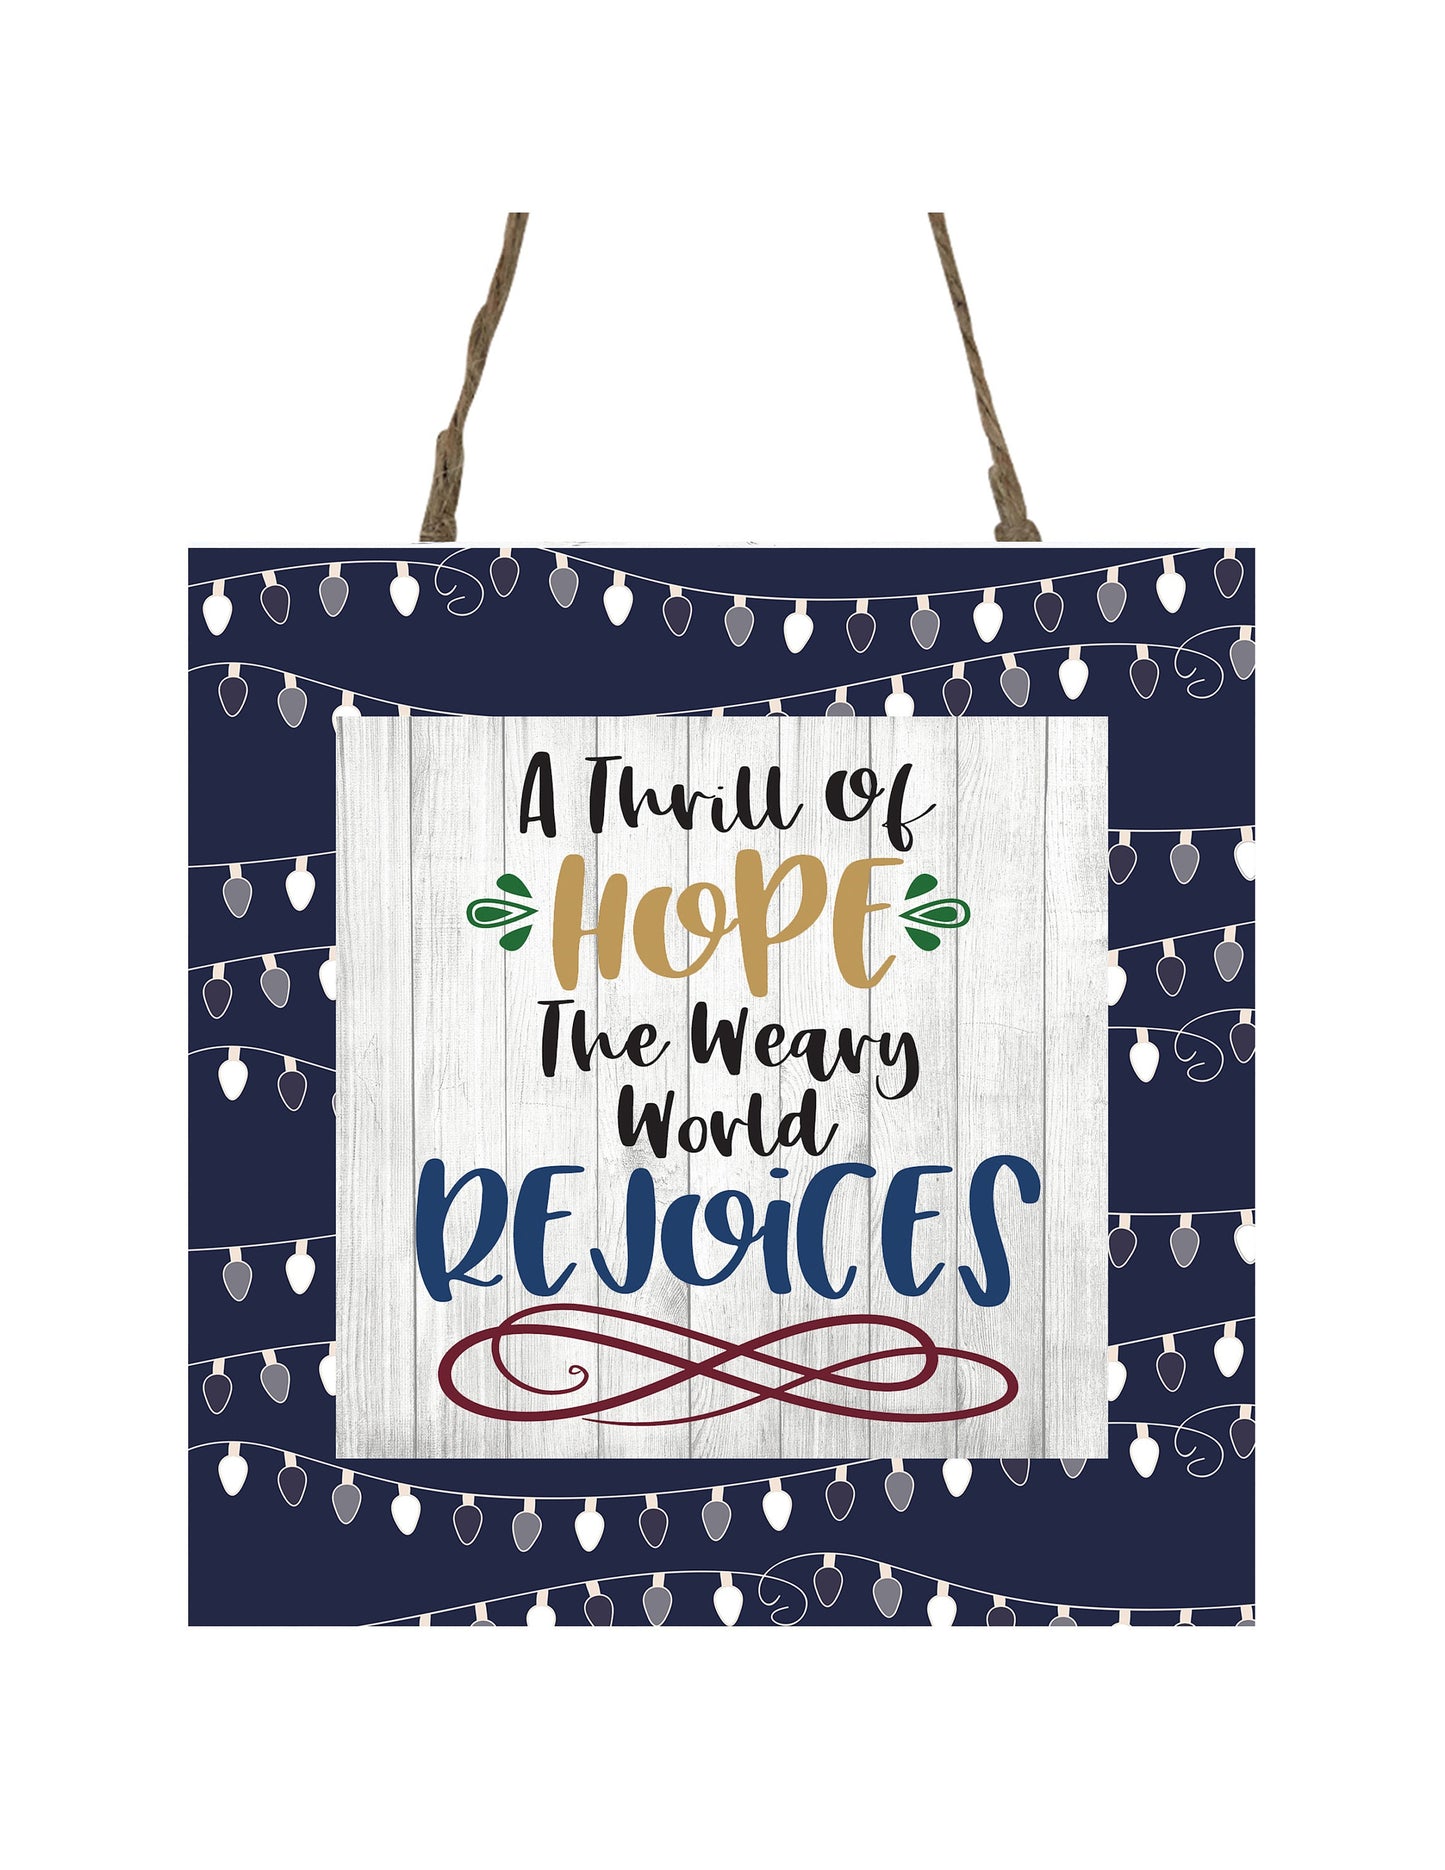 A Thrill of Hope The Weary World Rejoices Printed Handmade Wood Christmas Ornament Small Sign